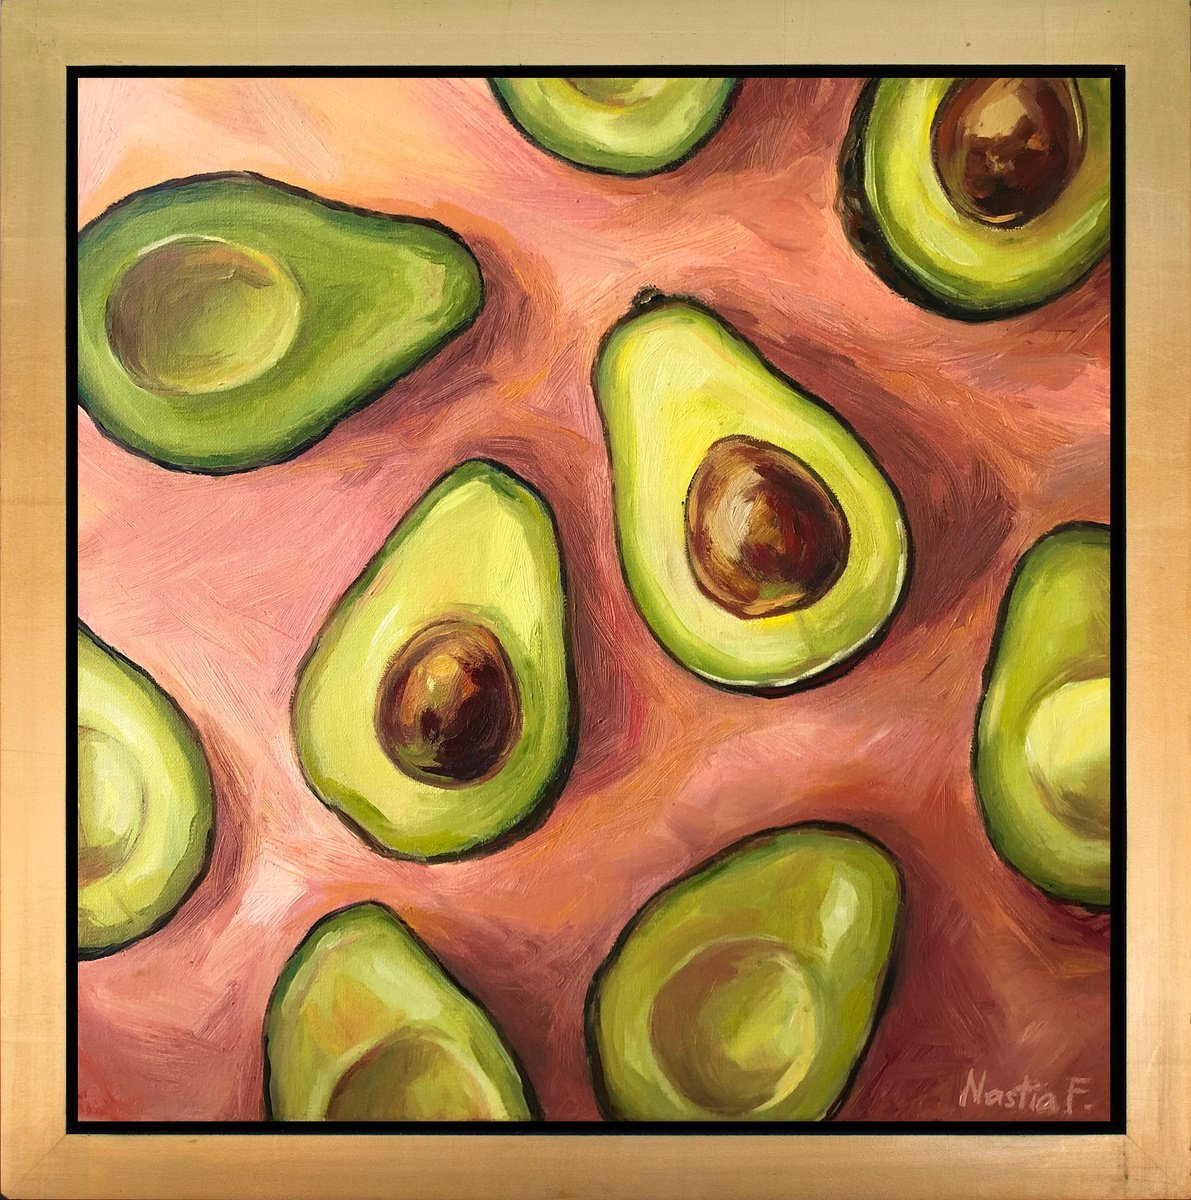 OTHER HALVES, Original Vibrant Minimalist Square Avocados Oil Painting by Nastia Fortune